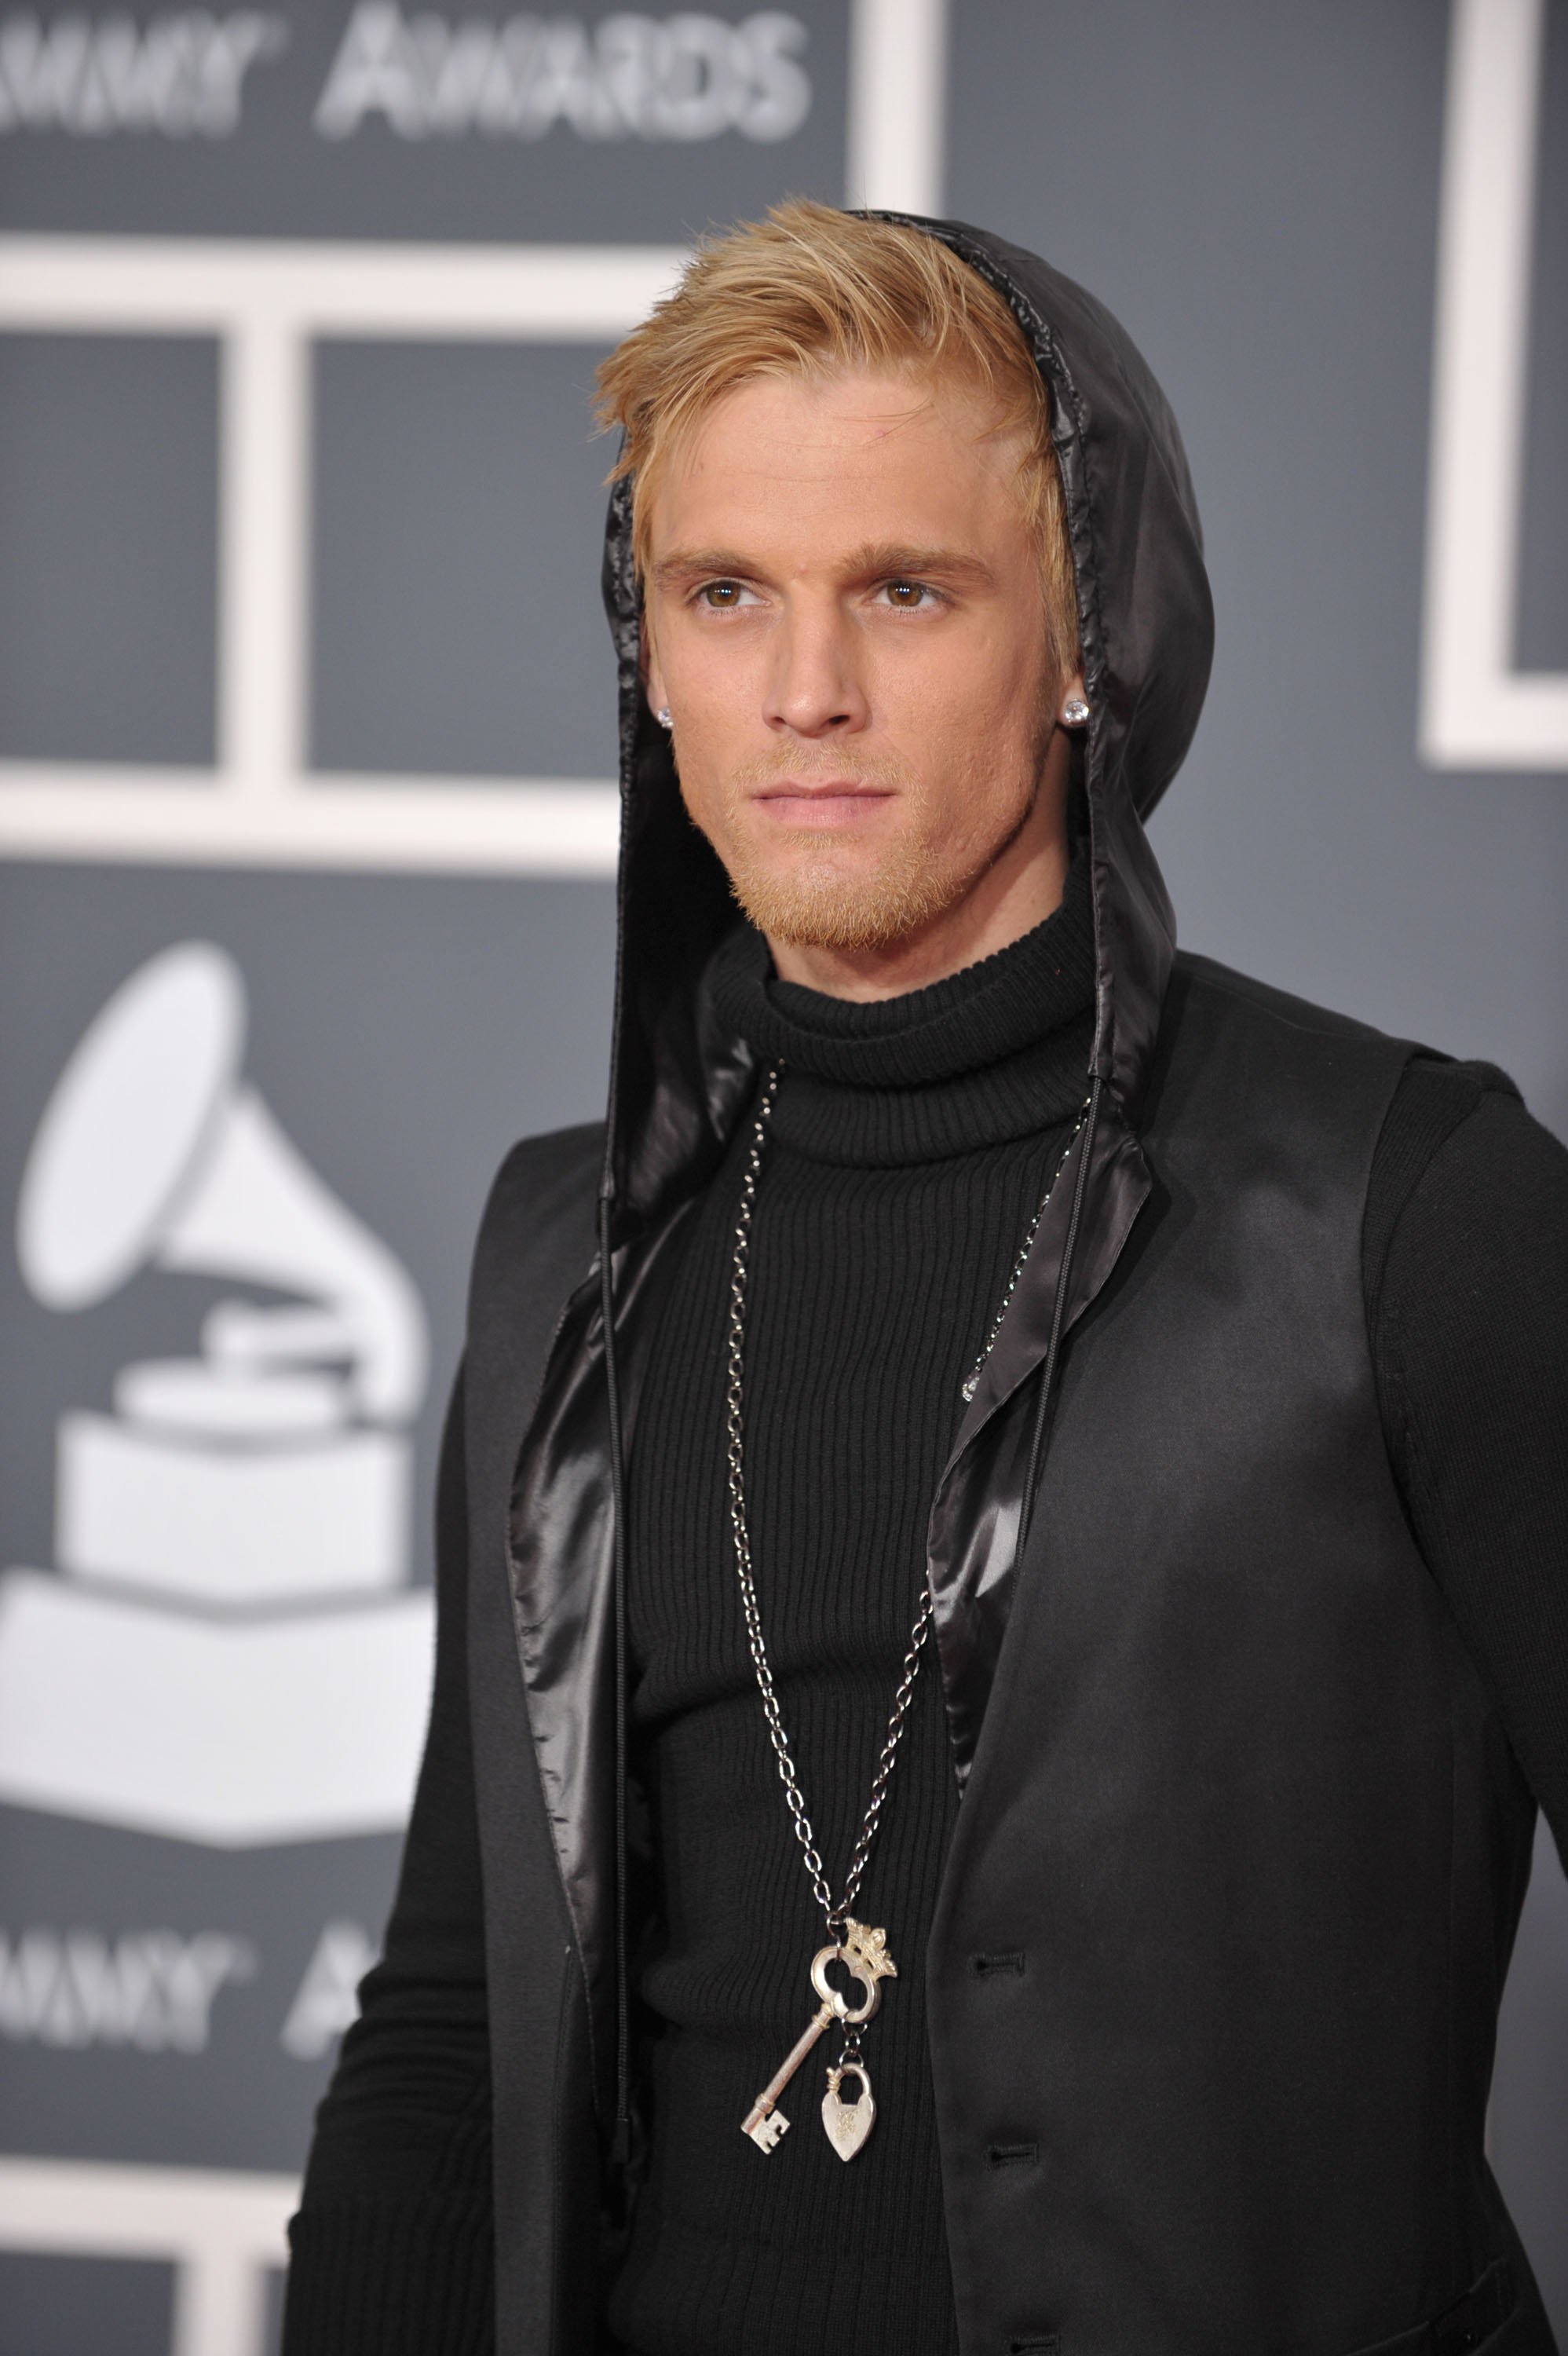 Aaron Carter arrives at the 52nd Annual GRAMMY Awards held at Staples Center on January 31, 2010 in Los Angeles, California. | Photo: GettyImages